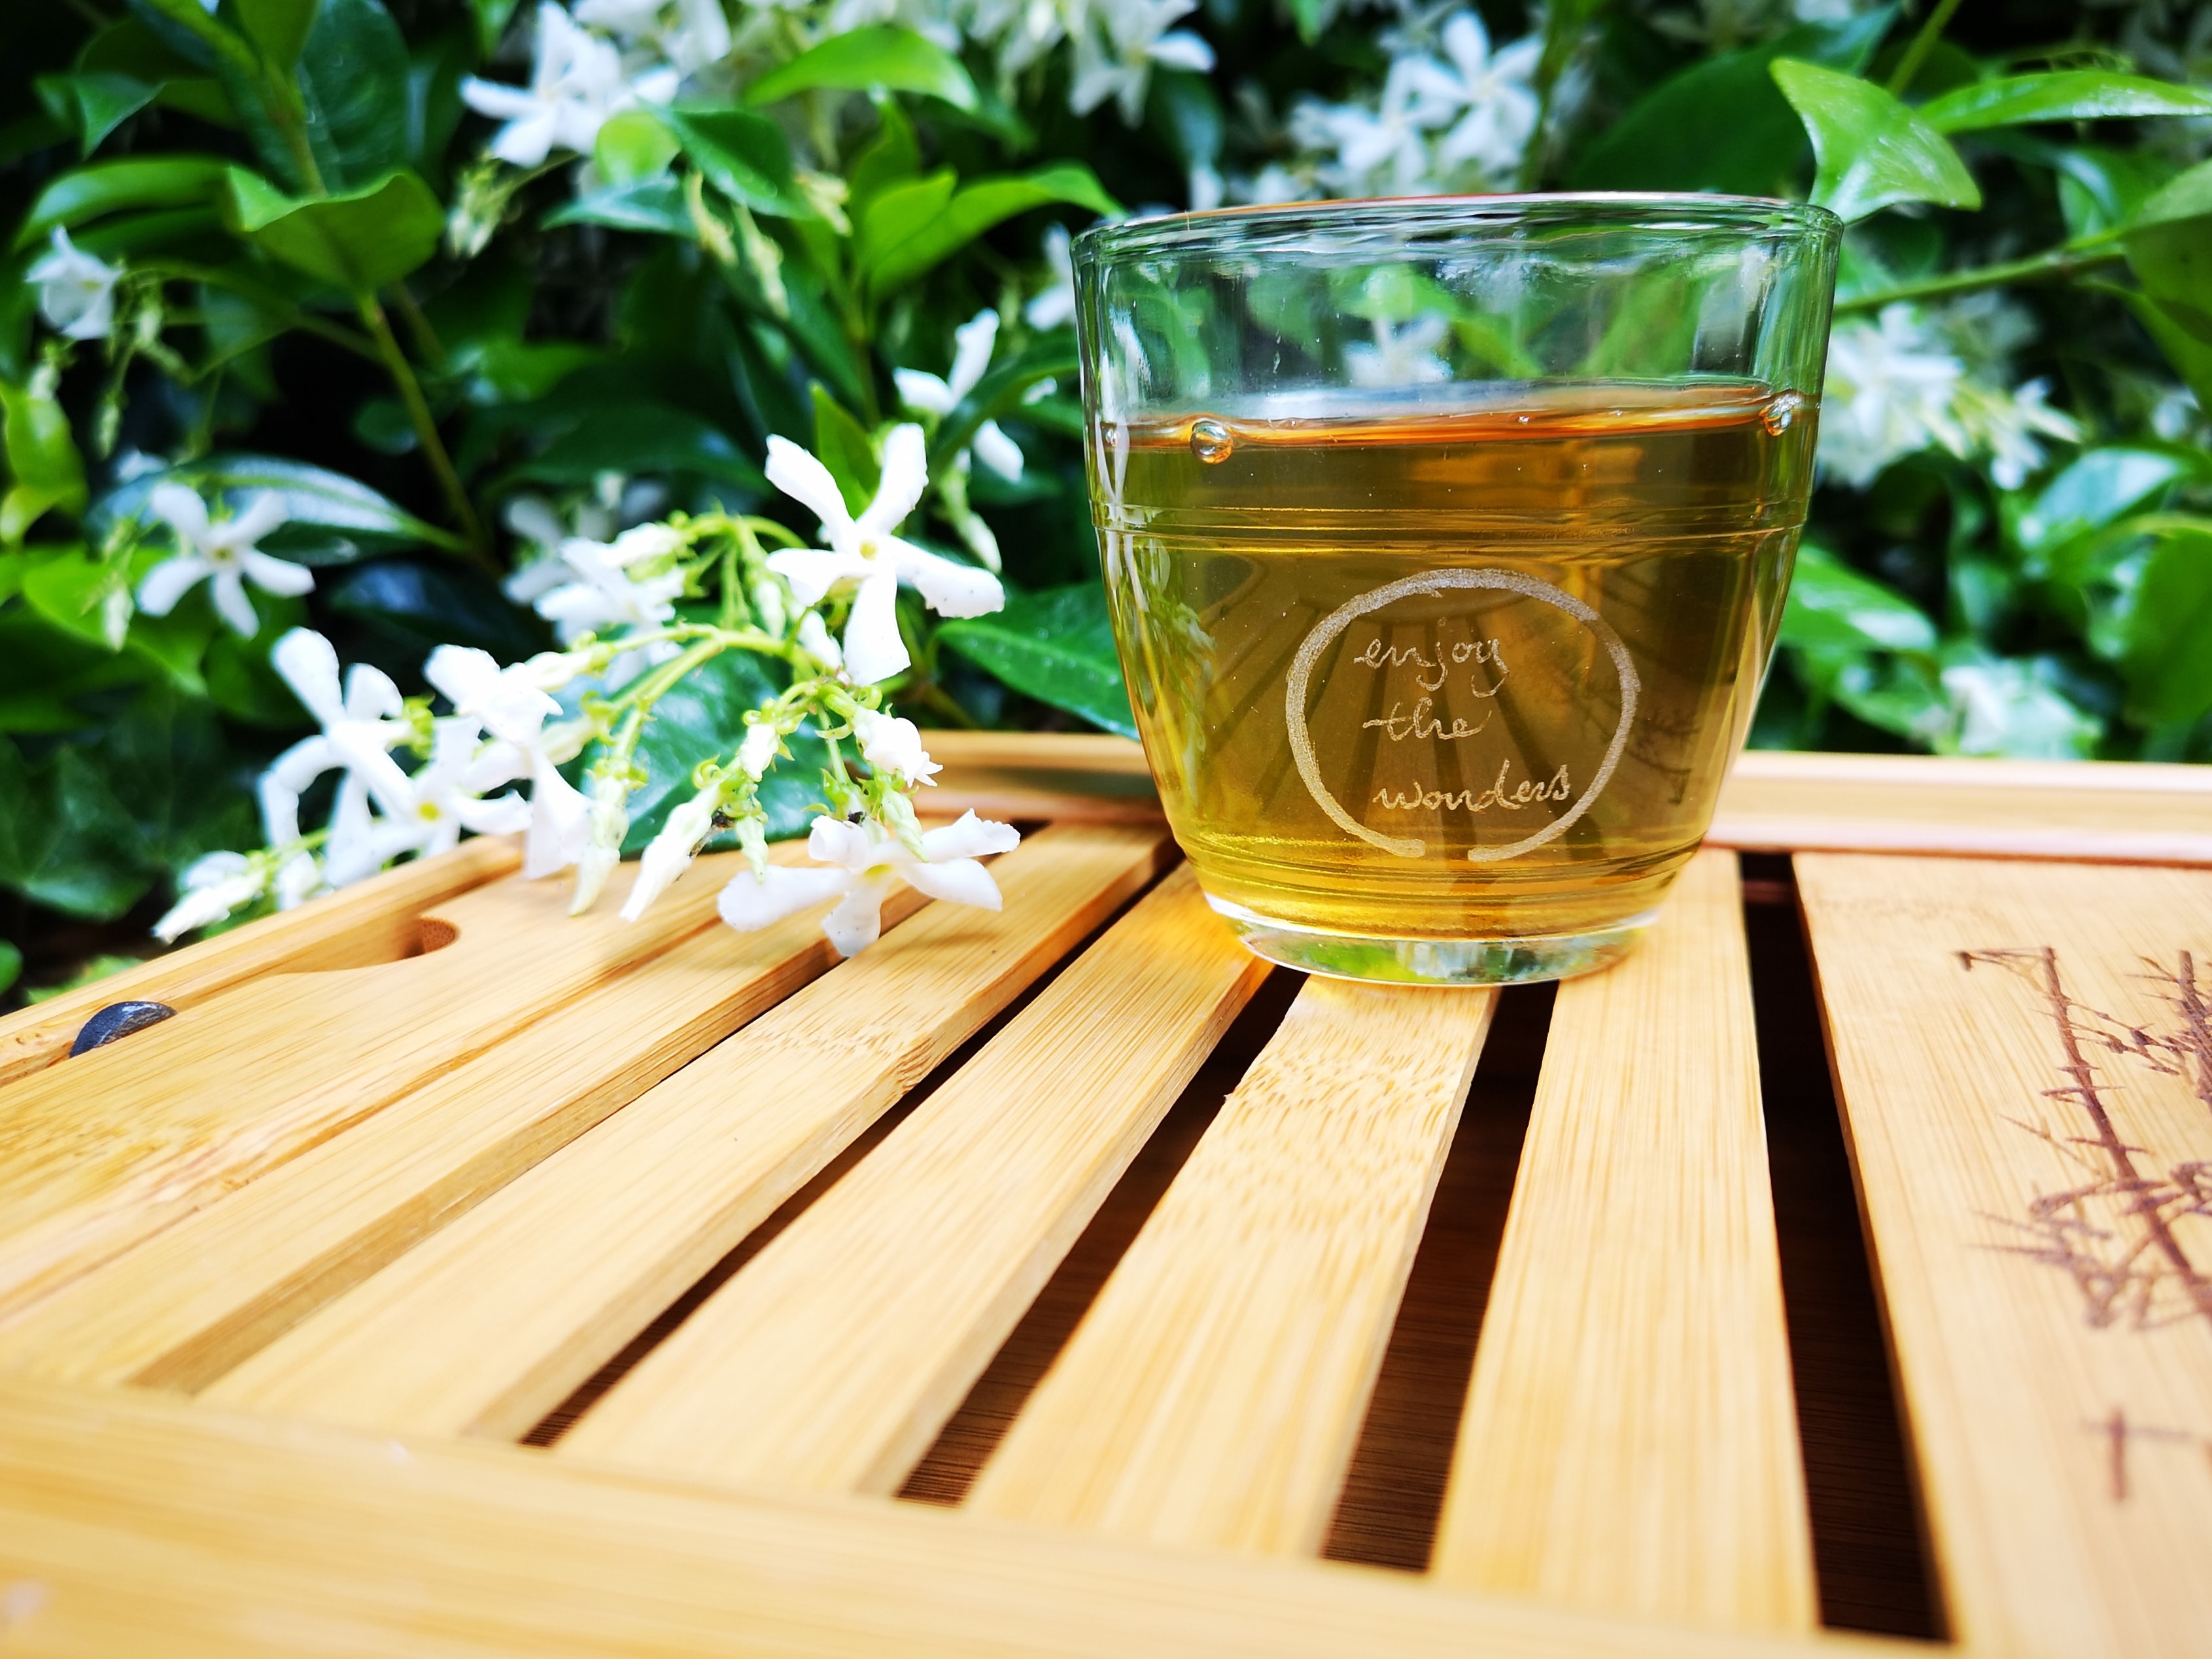 Cup of green tea in clear glass with “Enjoy the Wonders” inscribed, sitting on wooden tray. Image by Verena Böttcher, via Unsplash.com.